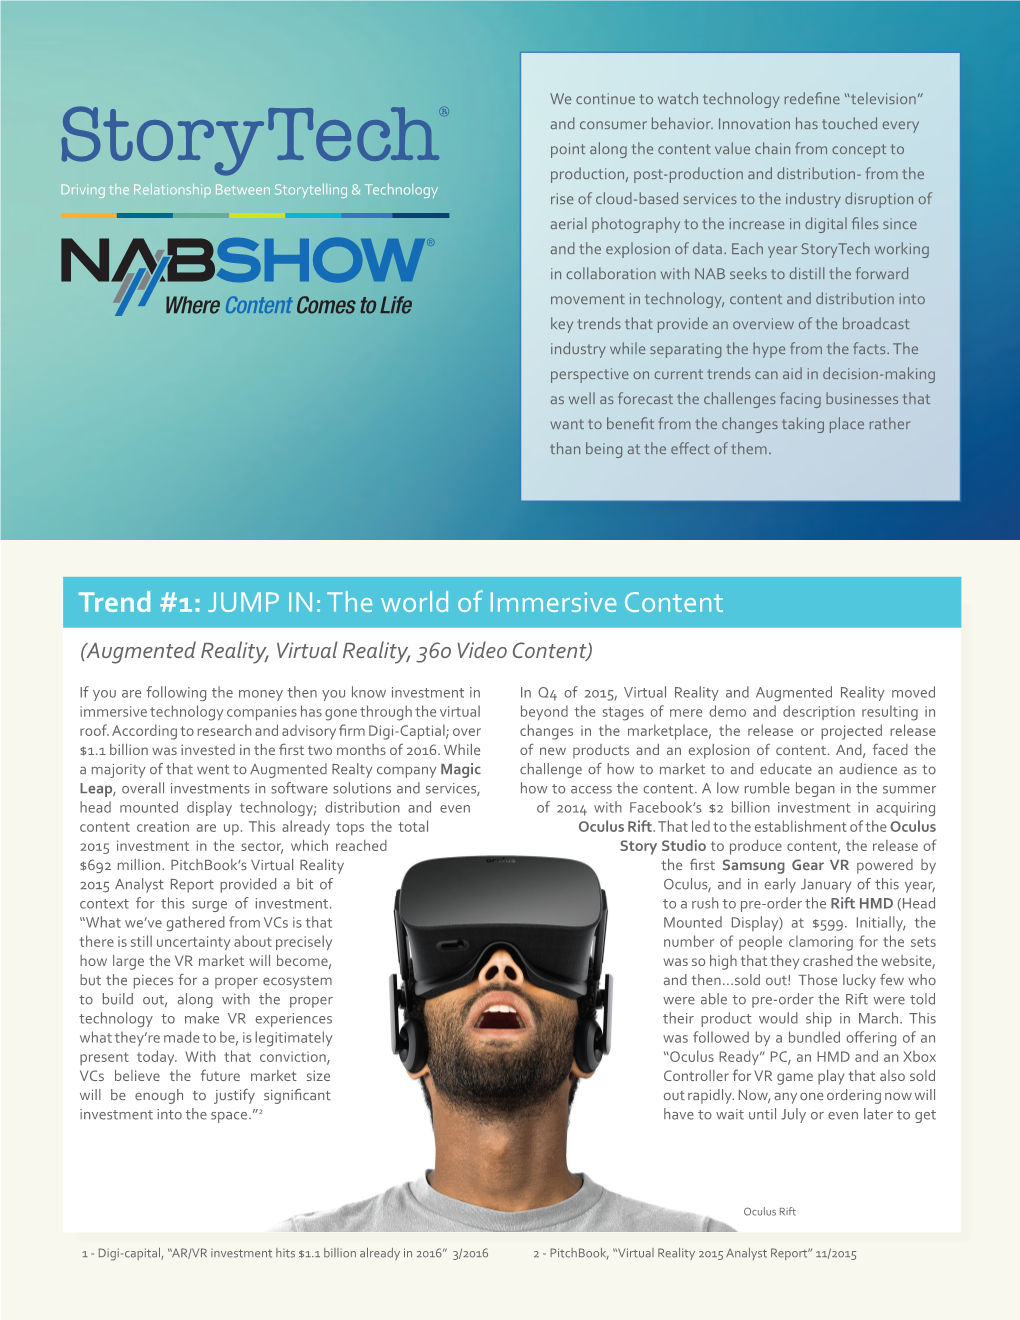 The World of Immersive Content (Augmented Reality, Virtual Reality, 360 Video Content)